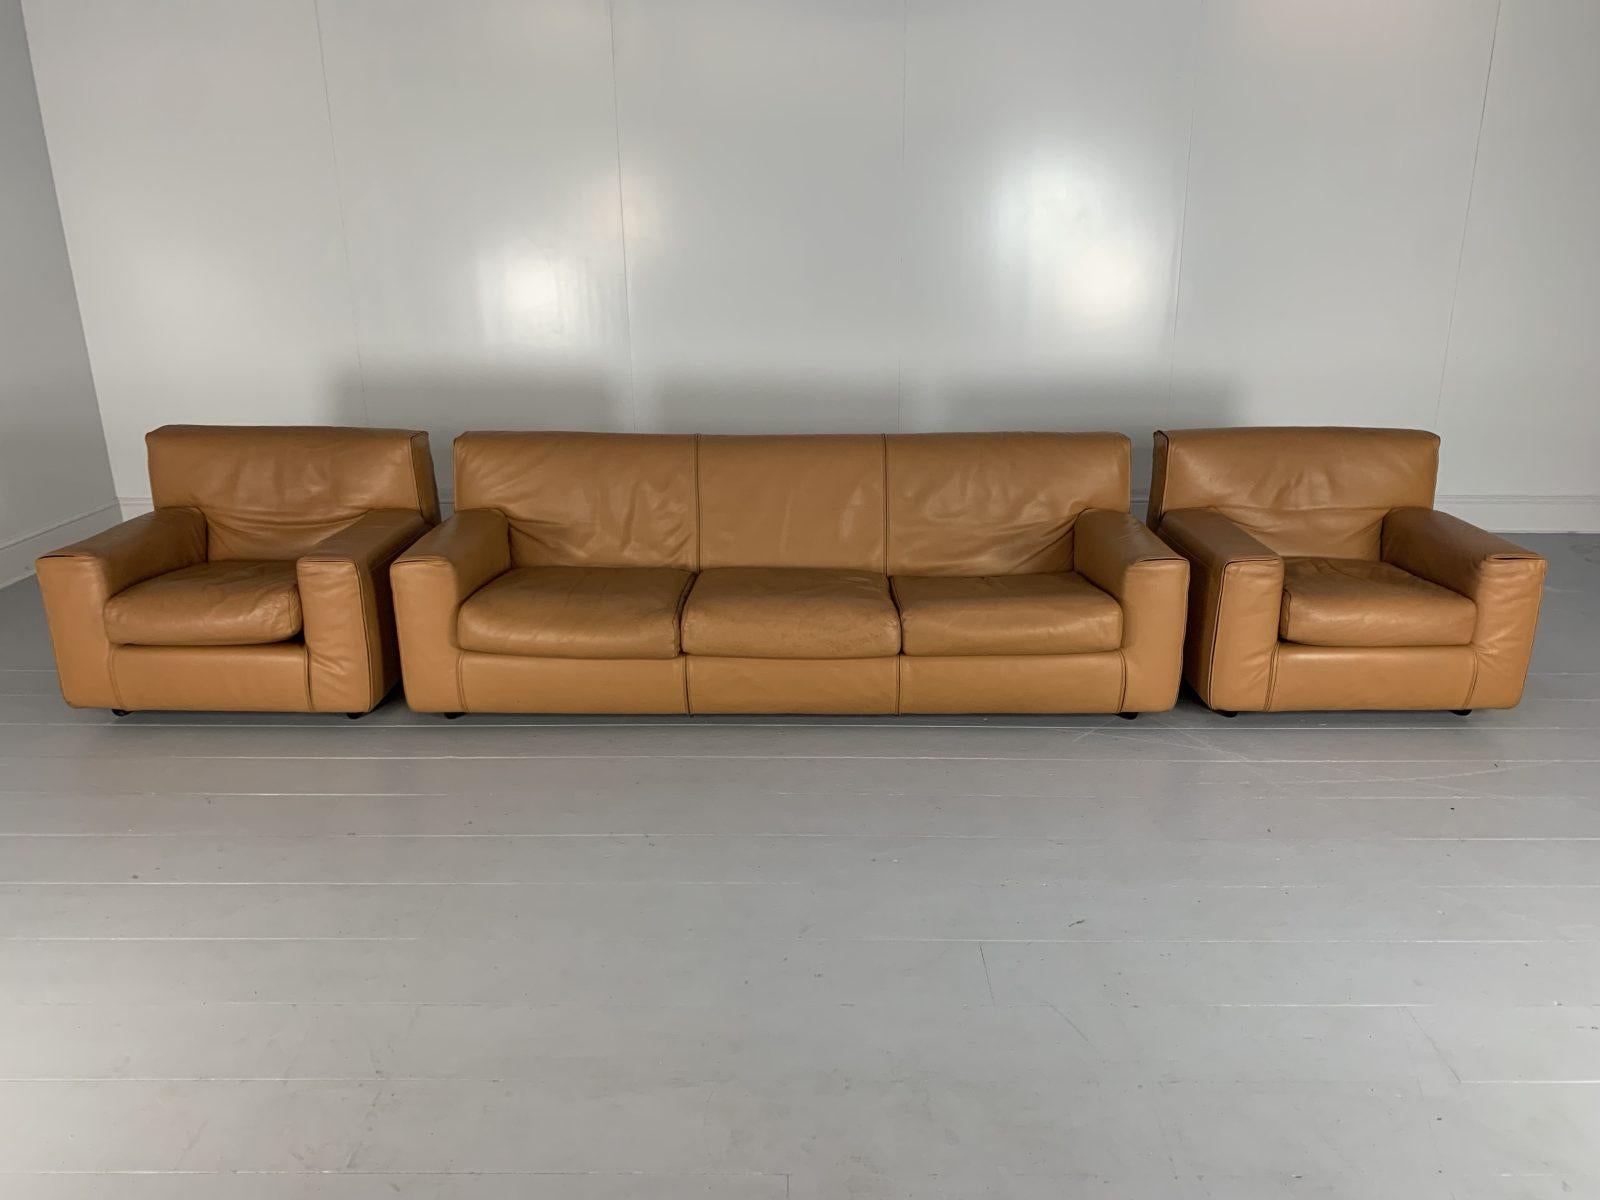 On offer on this occasion is ultra-rare (so rare in fact that we cannot identify the model!), superb, immaculately-presented suite of seating consisting of a 3-Seat Sofa and an identical pair of Armchairs, from the world renown Italian furniture